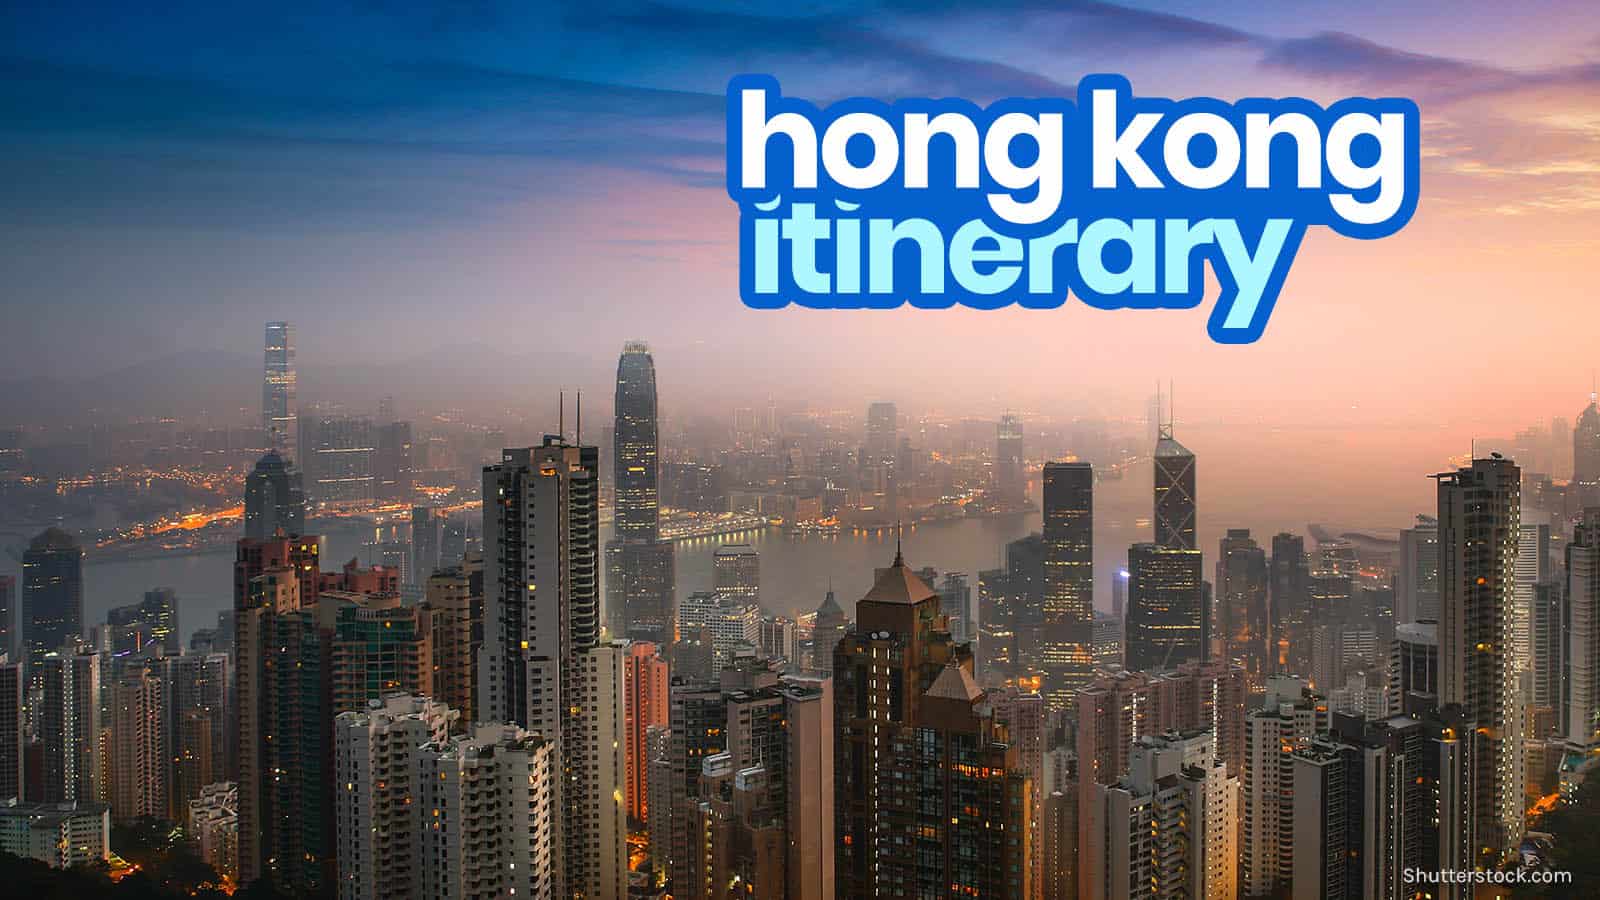 HONG KONG ITINERARY: 12 Best Things to Do & Places to Visit